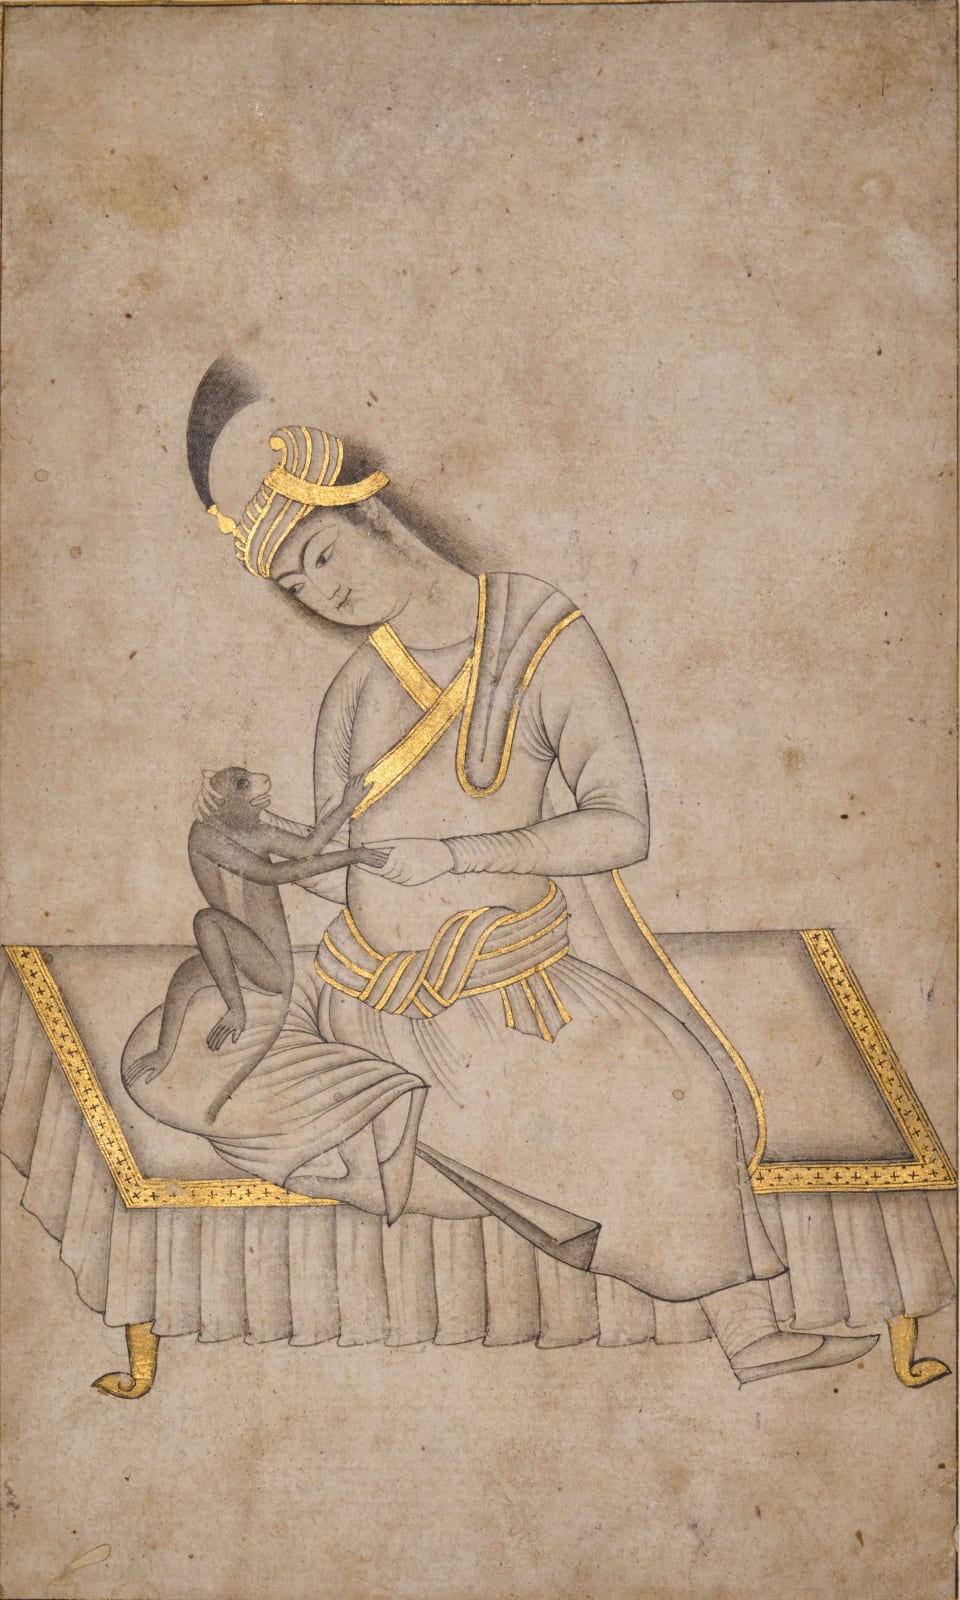 Youth Playing with a Pet Monkey By a Persian artist working in the Deccan, possibly Golconda, c. 1620-30